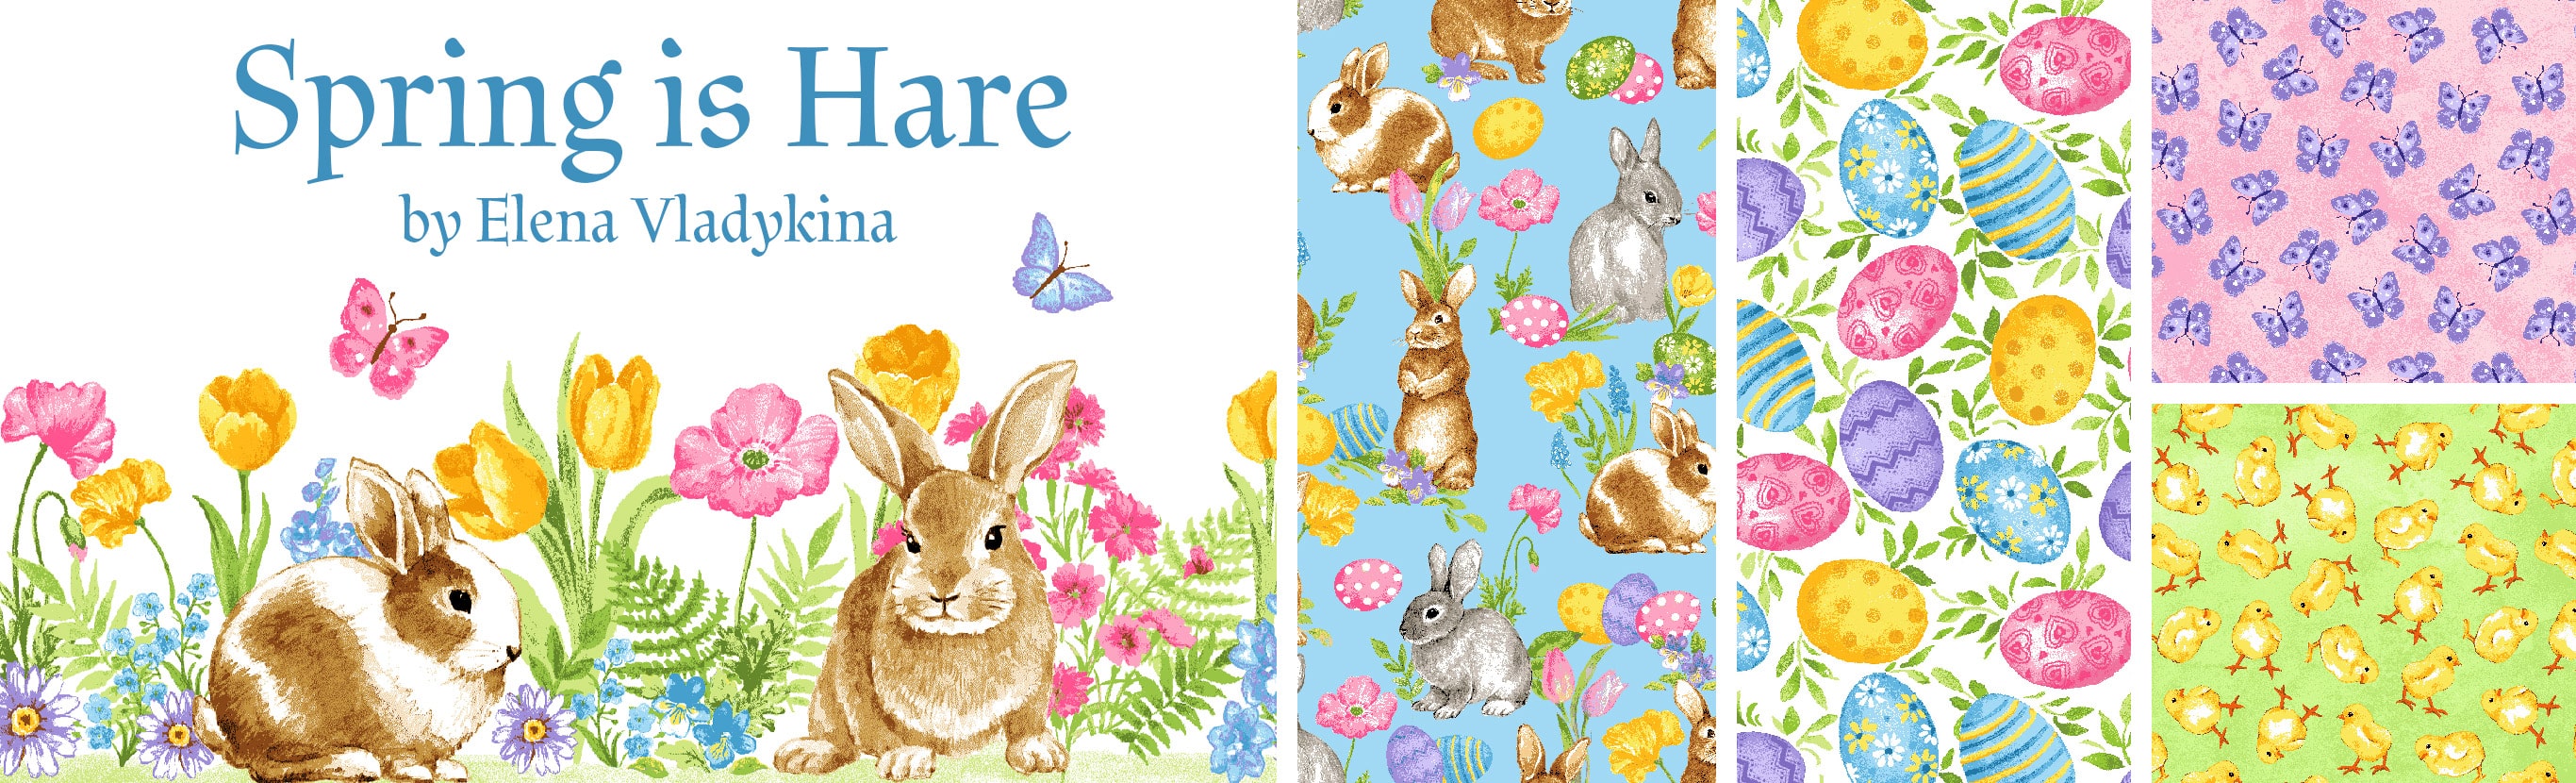 Spring is Hare